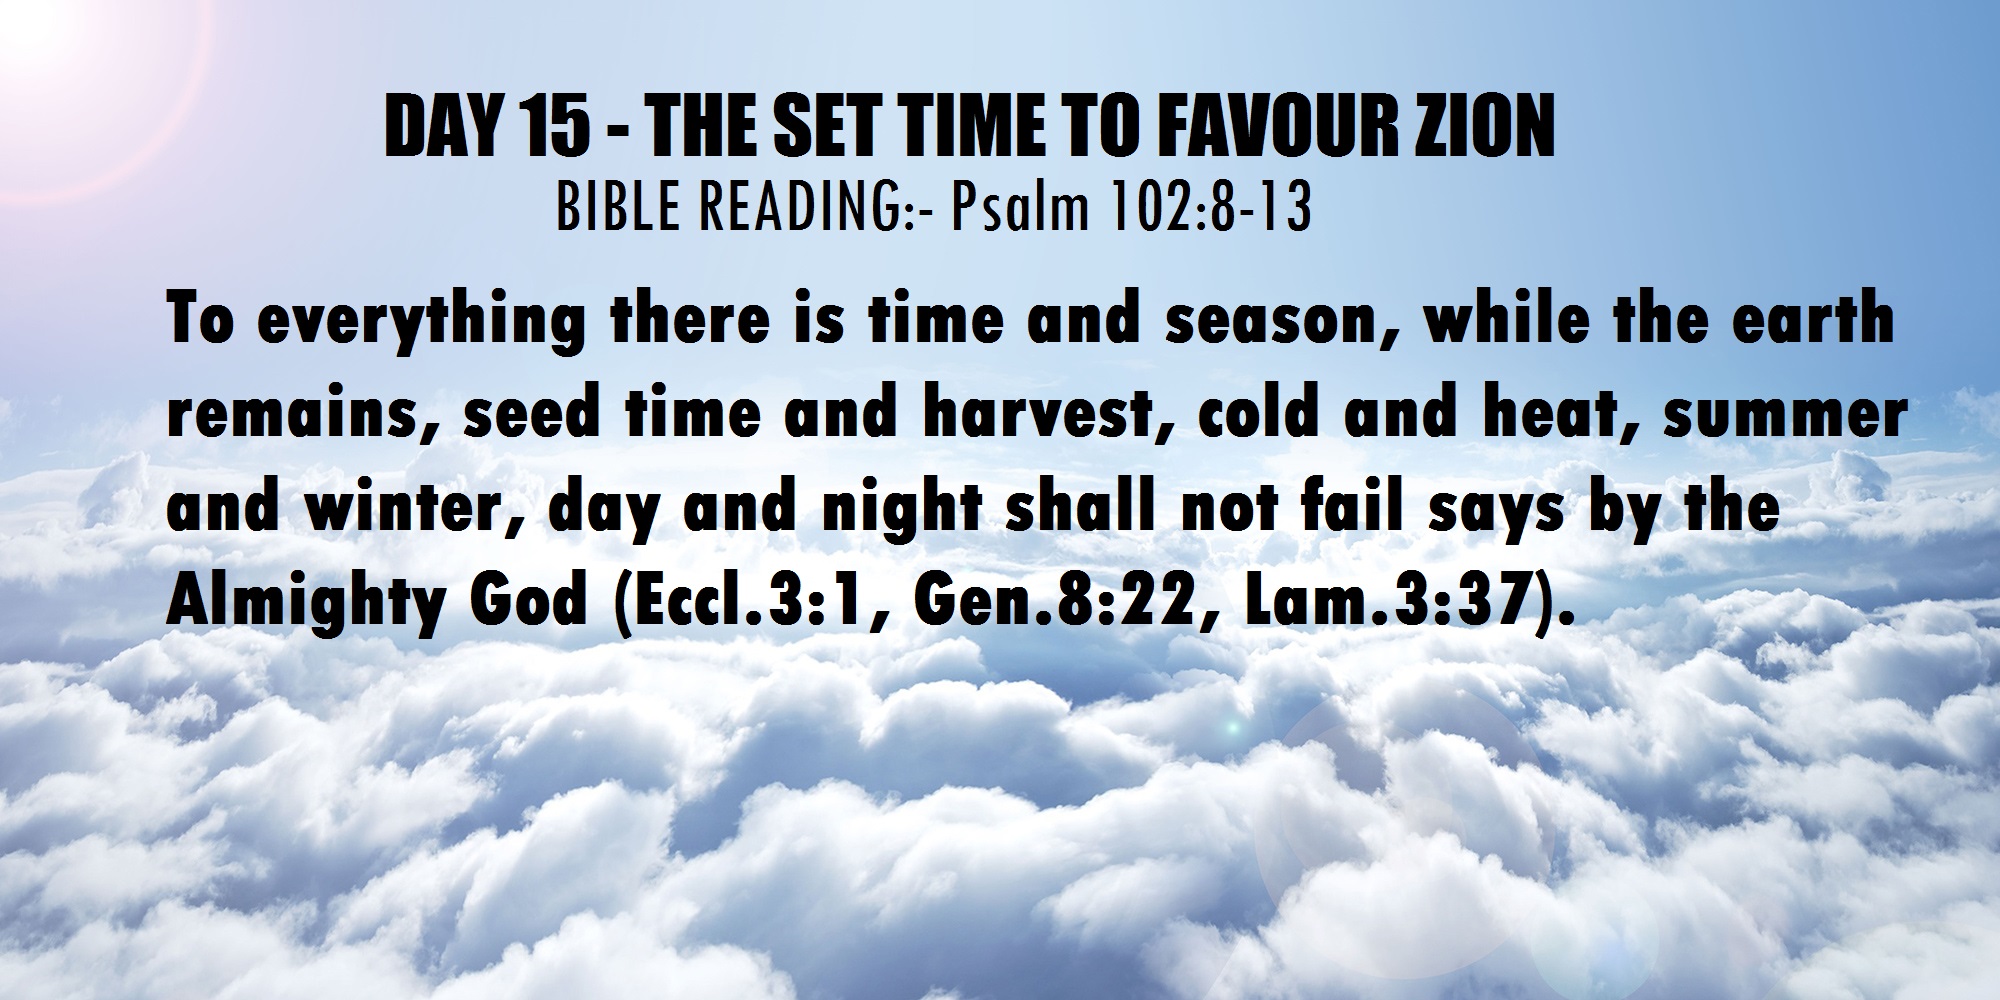 DAY 15 – THE SET TIME TO FAVOUR ZION